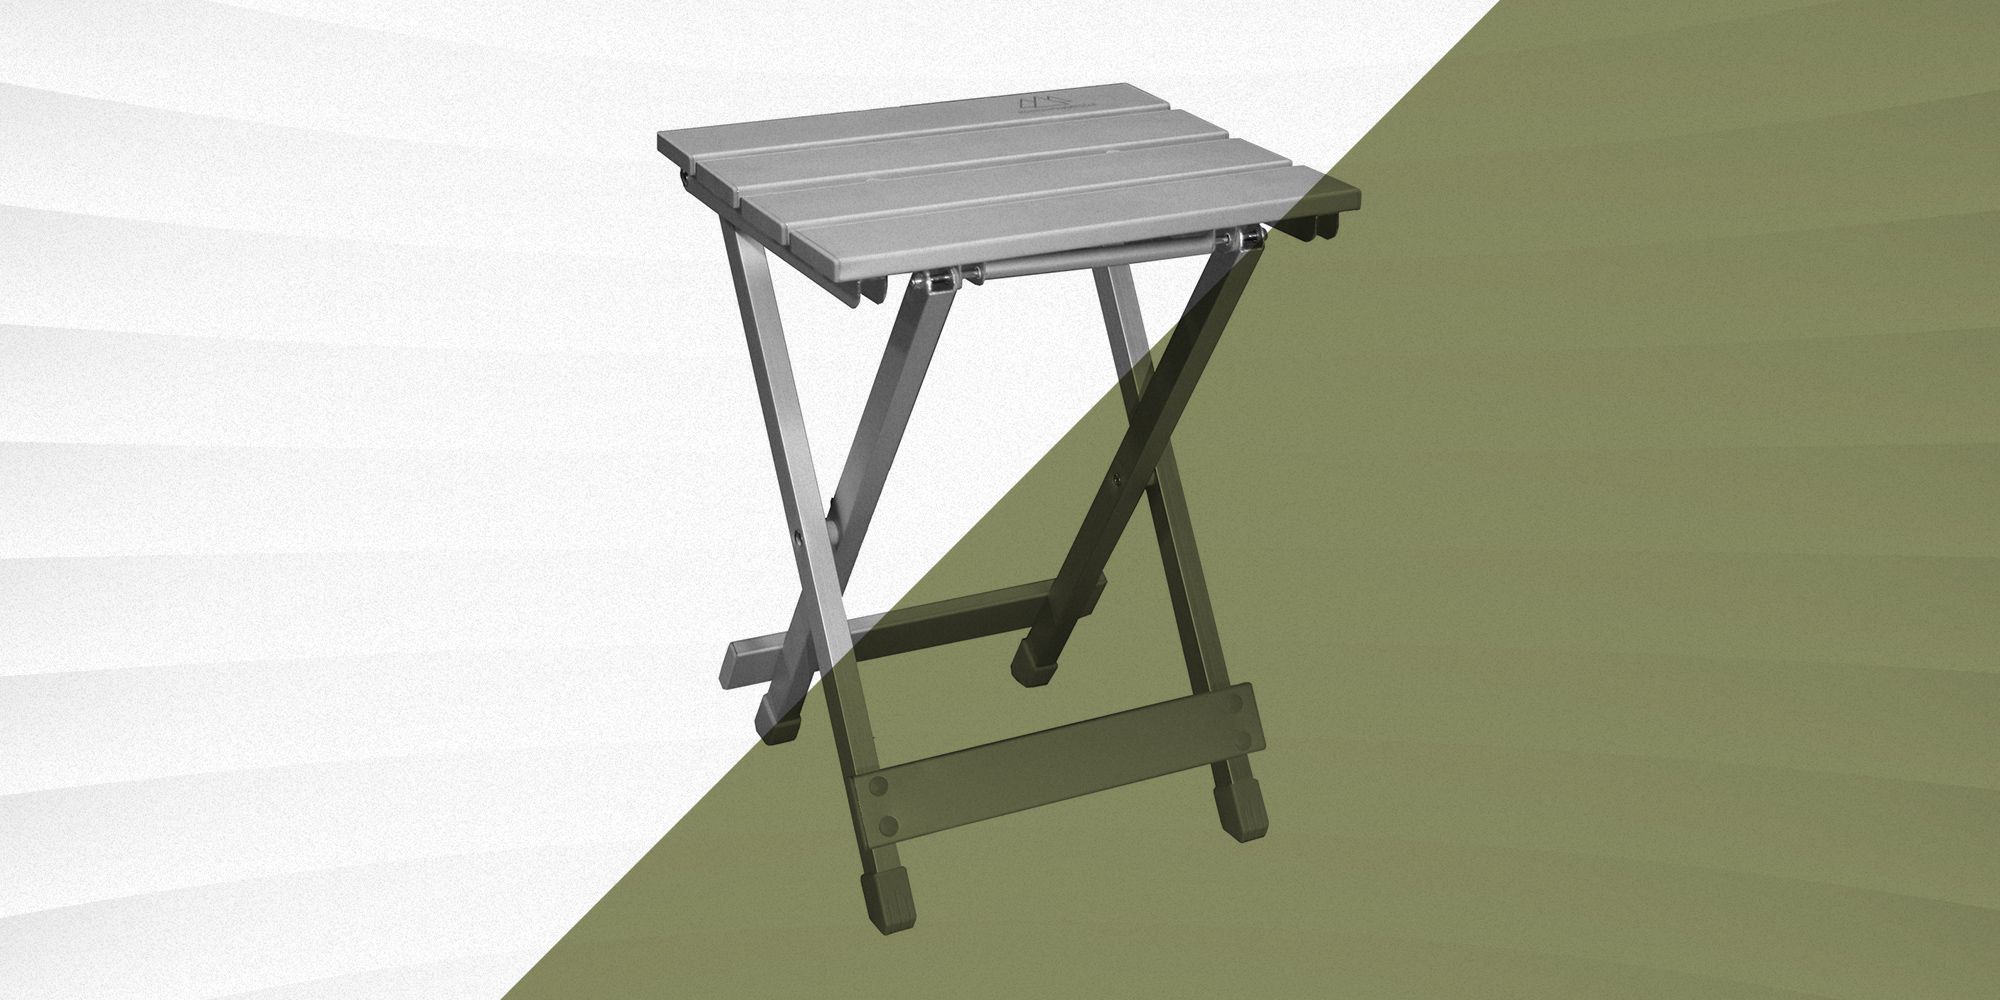 Sturdy Lightweight Indoor Outdoor Dining Party Camp Picnic Table Adjustable Height Portable Camping Table Mostbest Aluminum Folding Table 